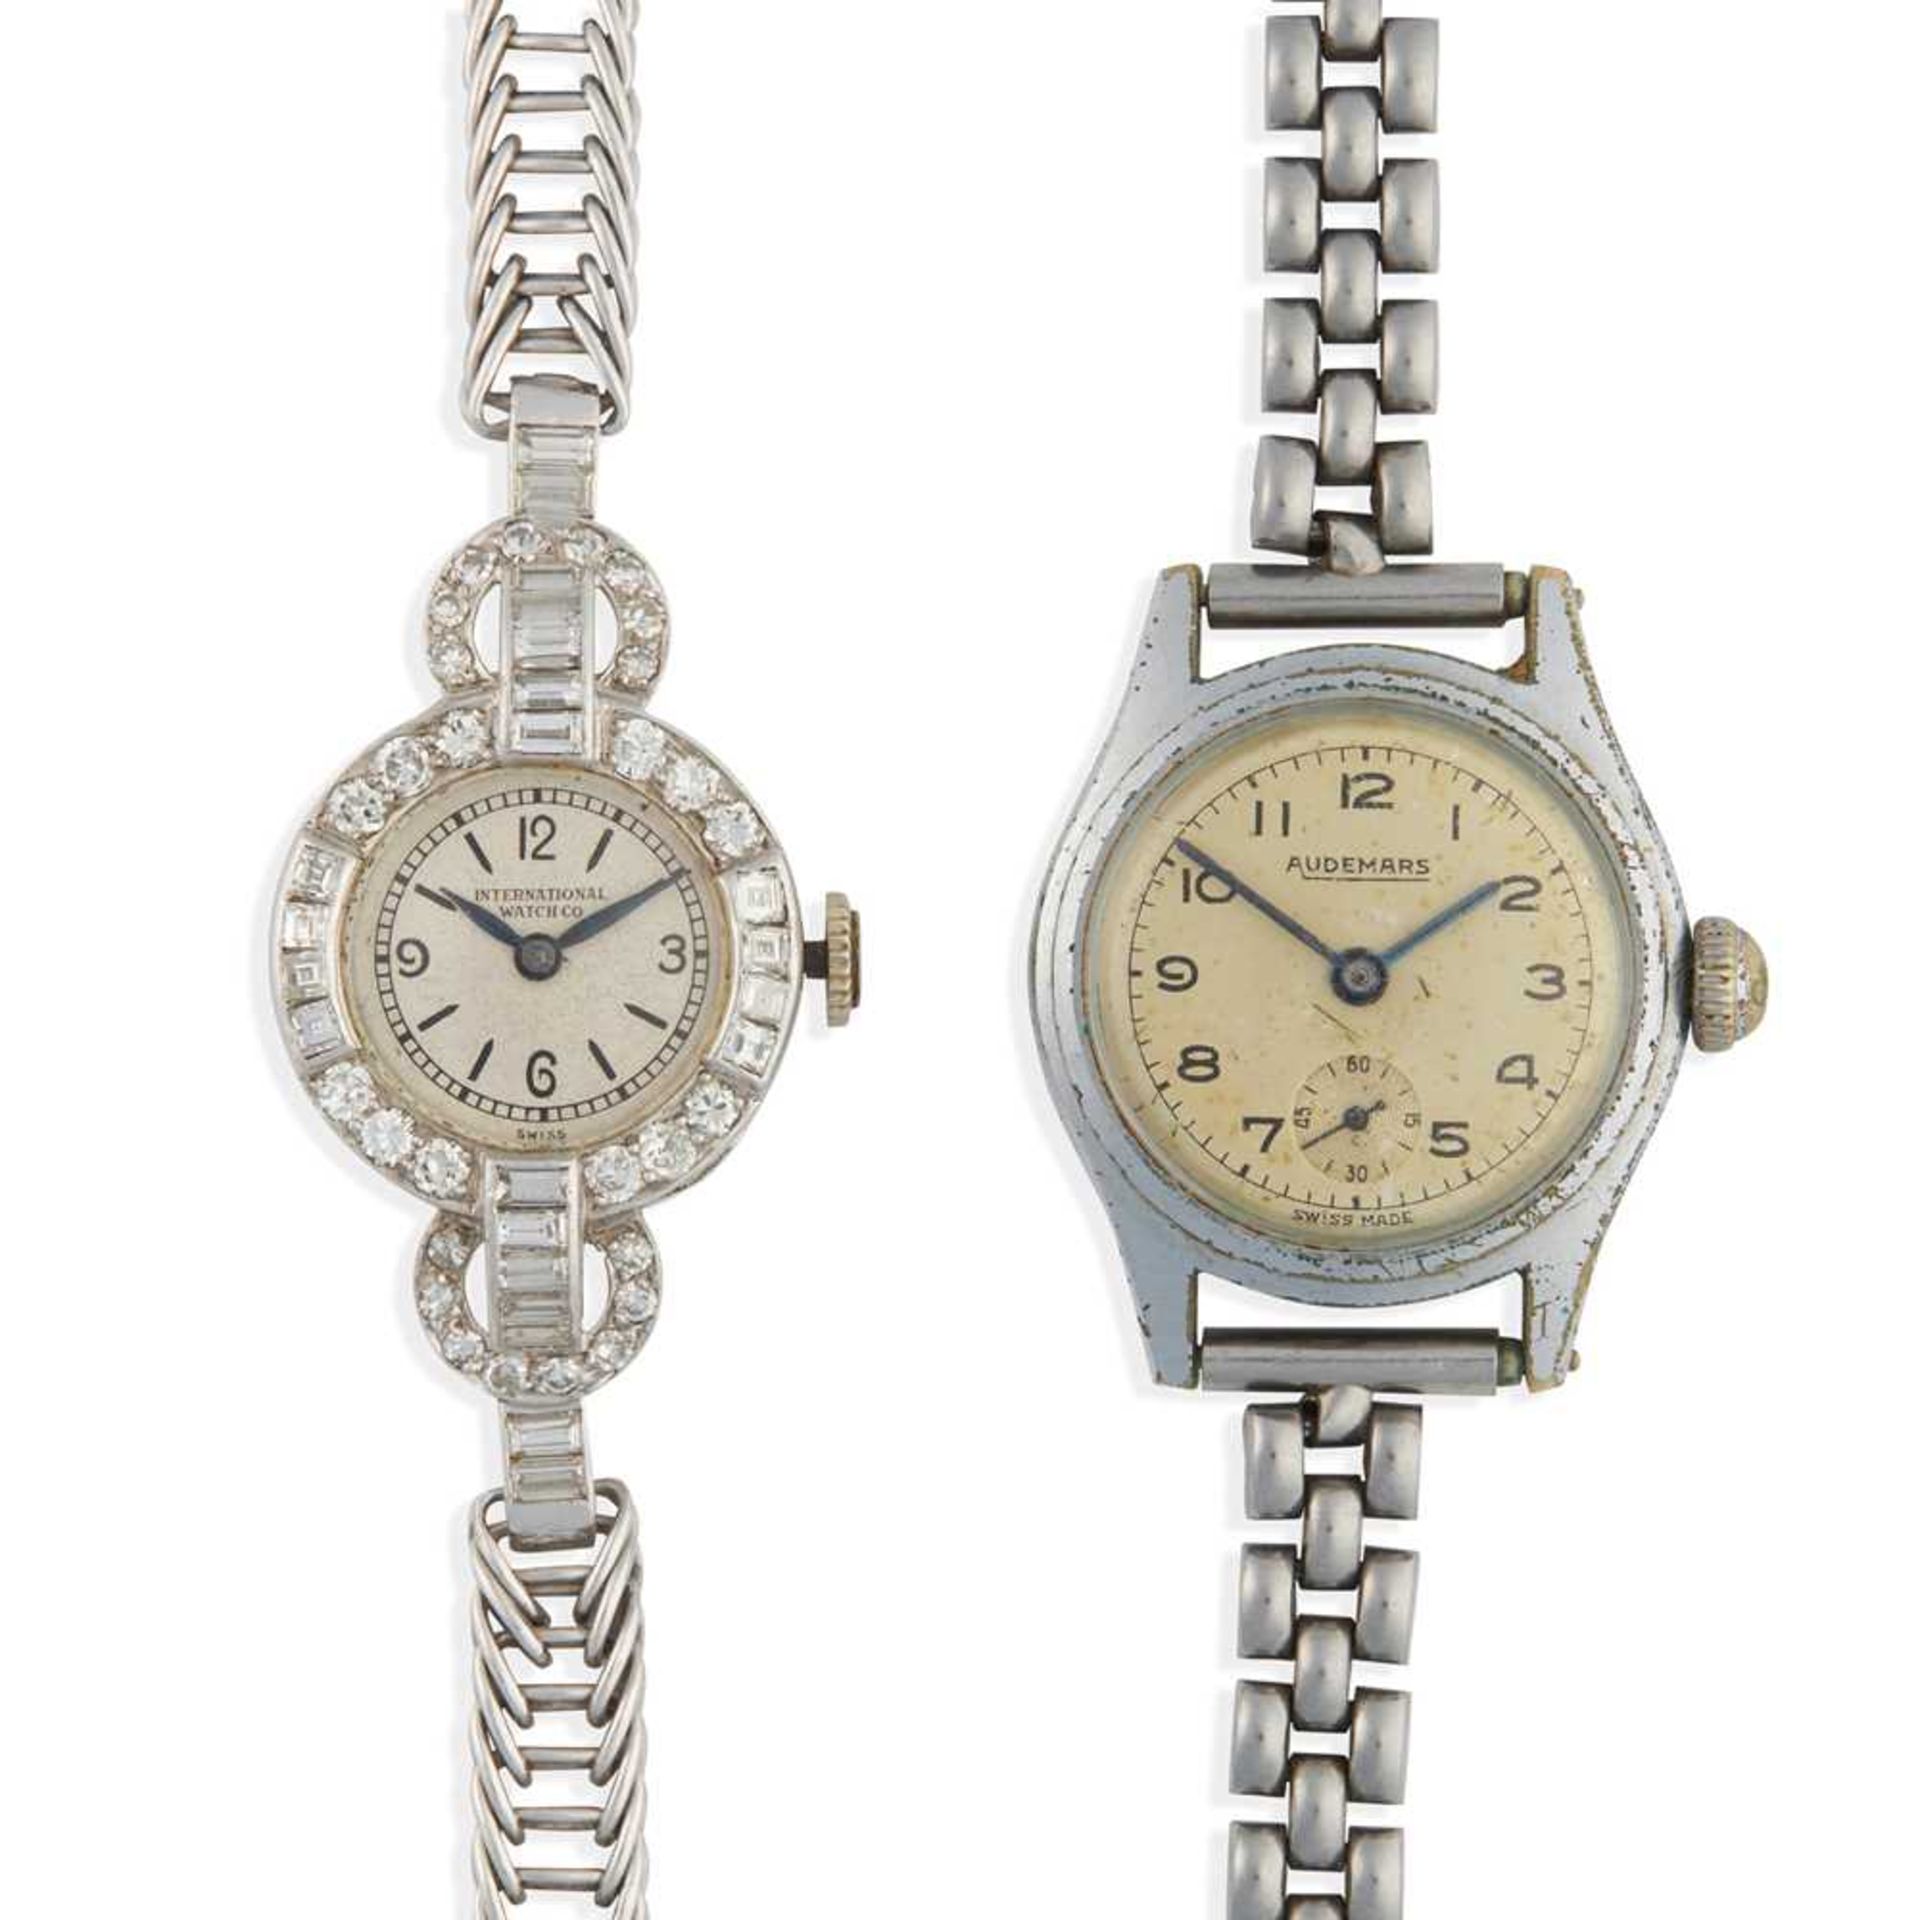 Two lady's 20th century watches